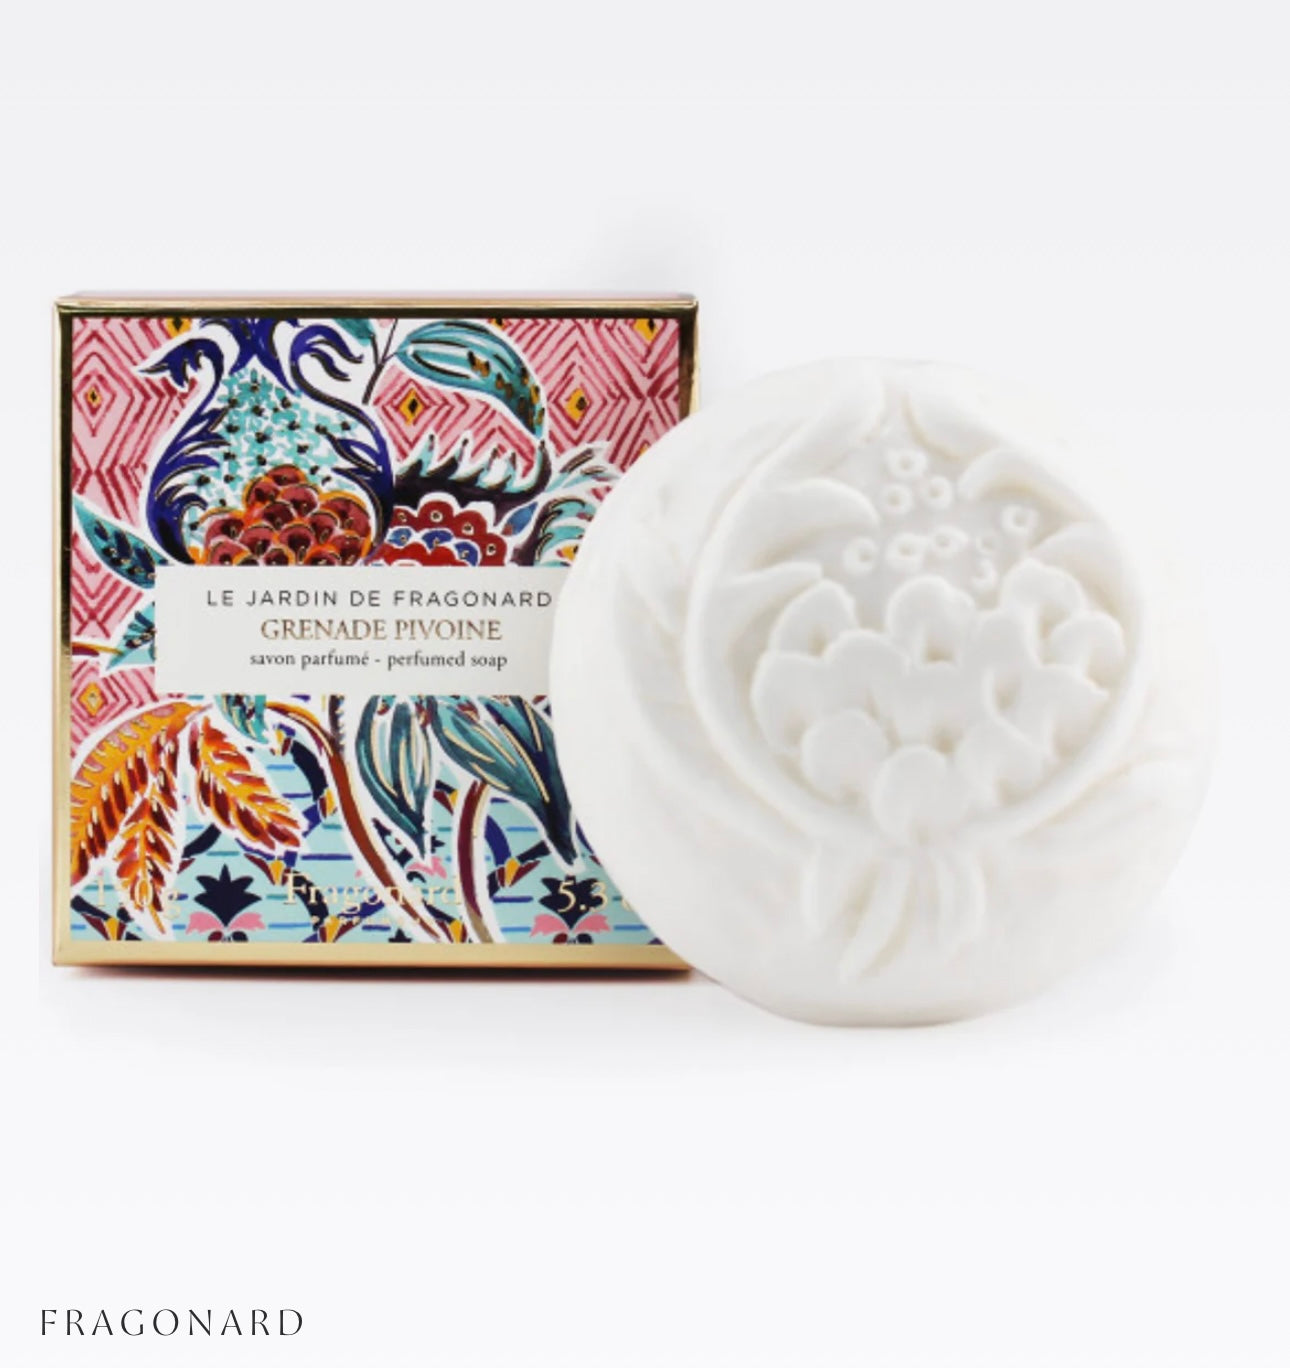 Heliotrope Gingembre Soap + Dish Boxed Set